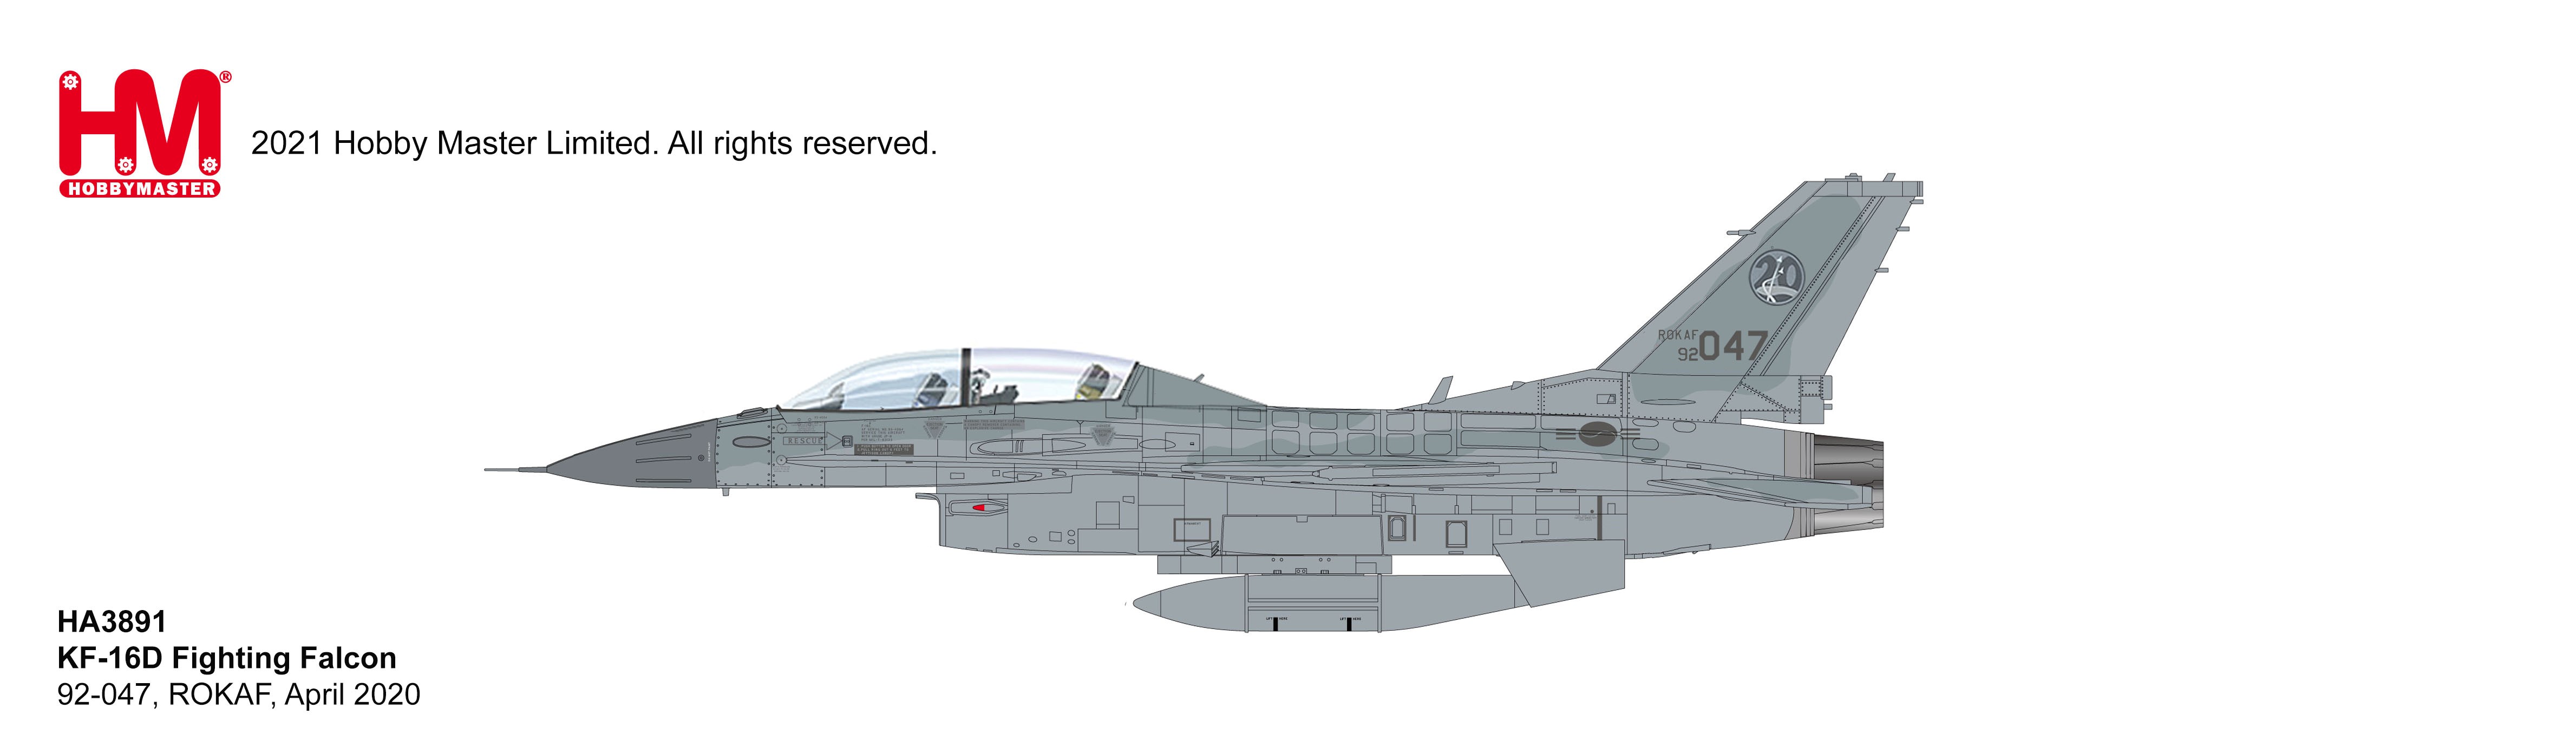 KF-16D Fighting Falcon 20th Fighter Wing, ROKAF, April 2020 (1:72)